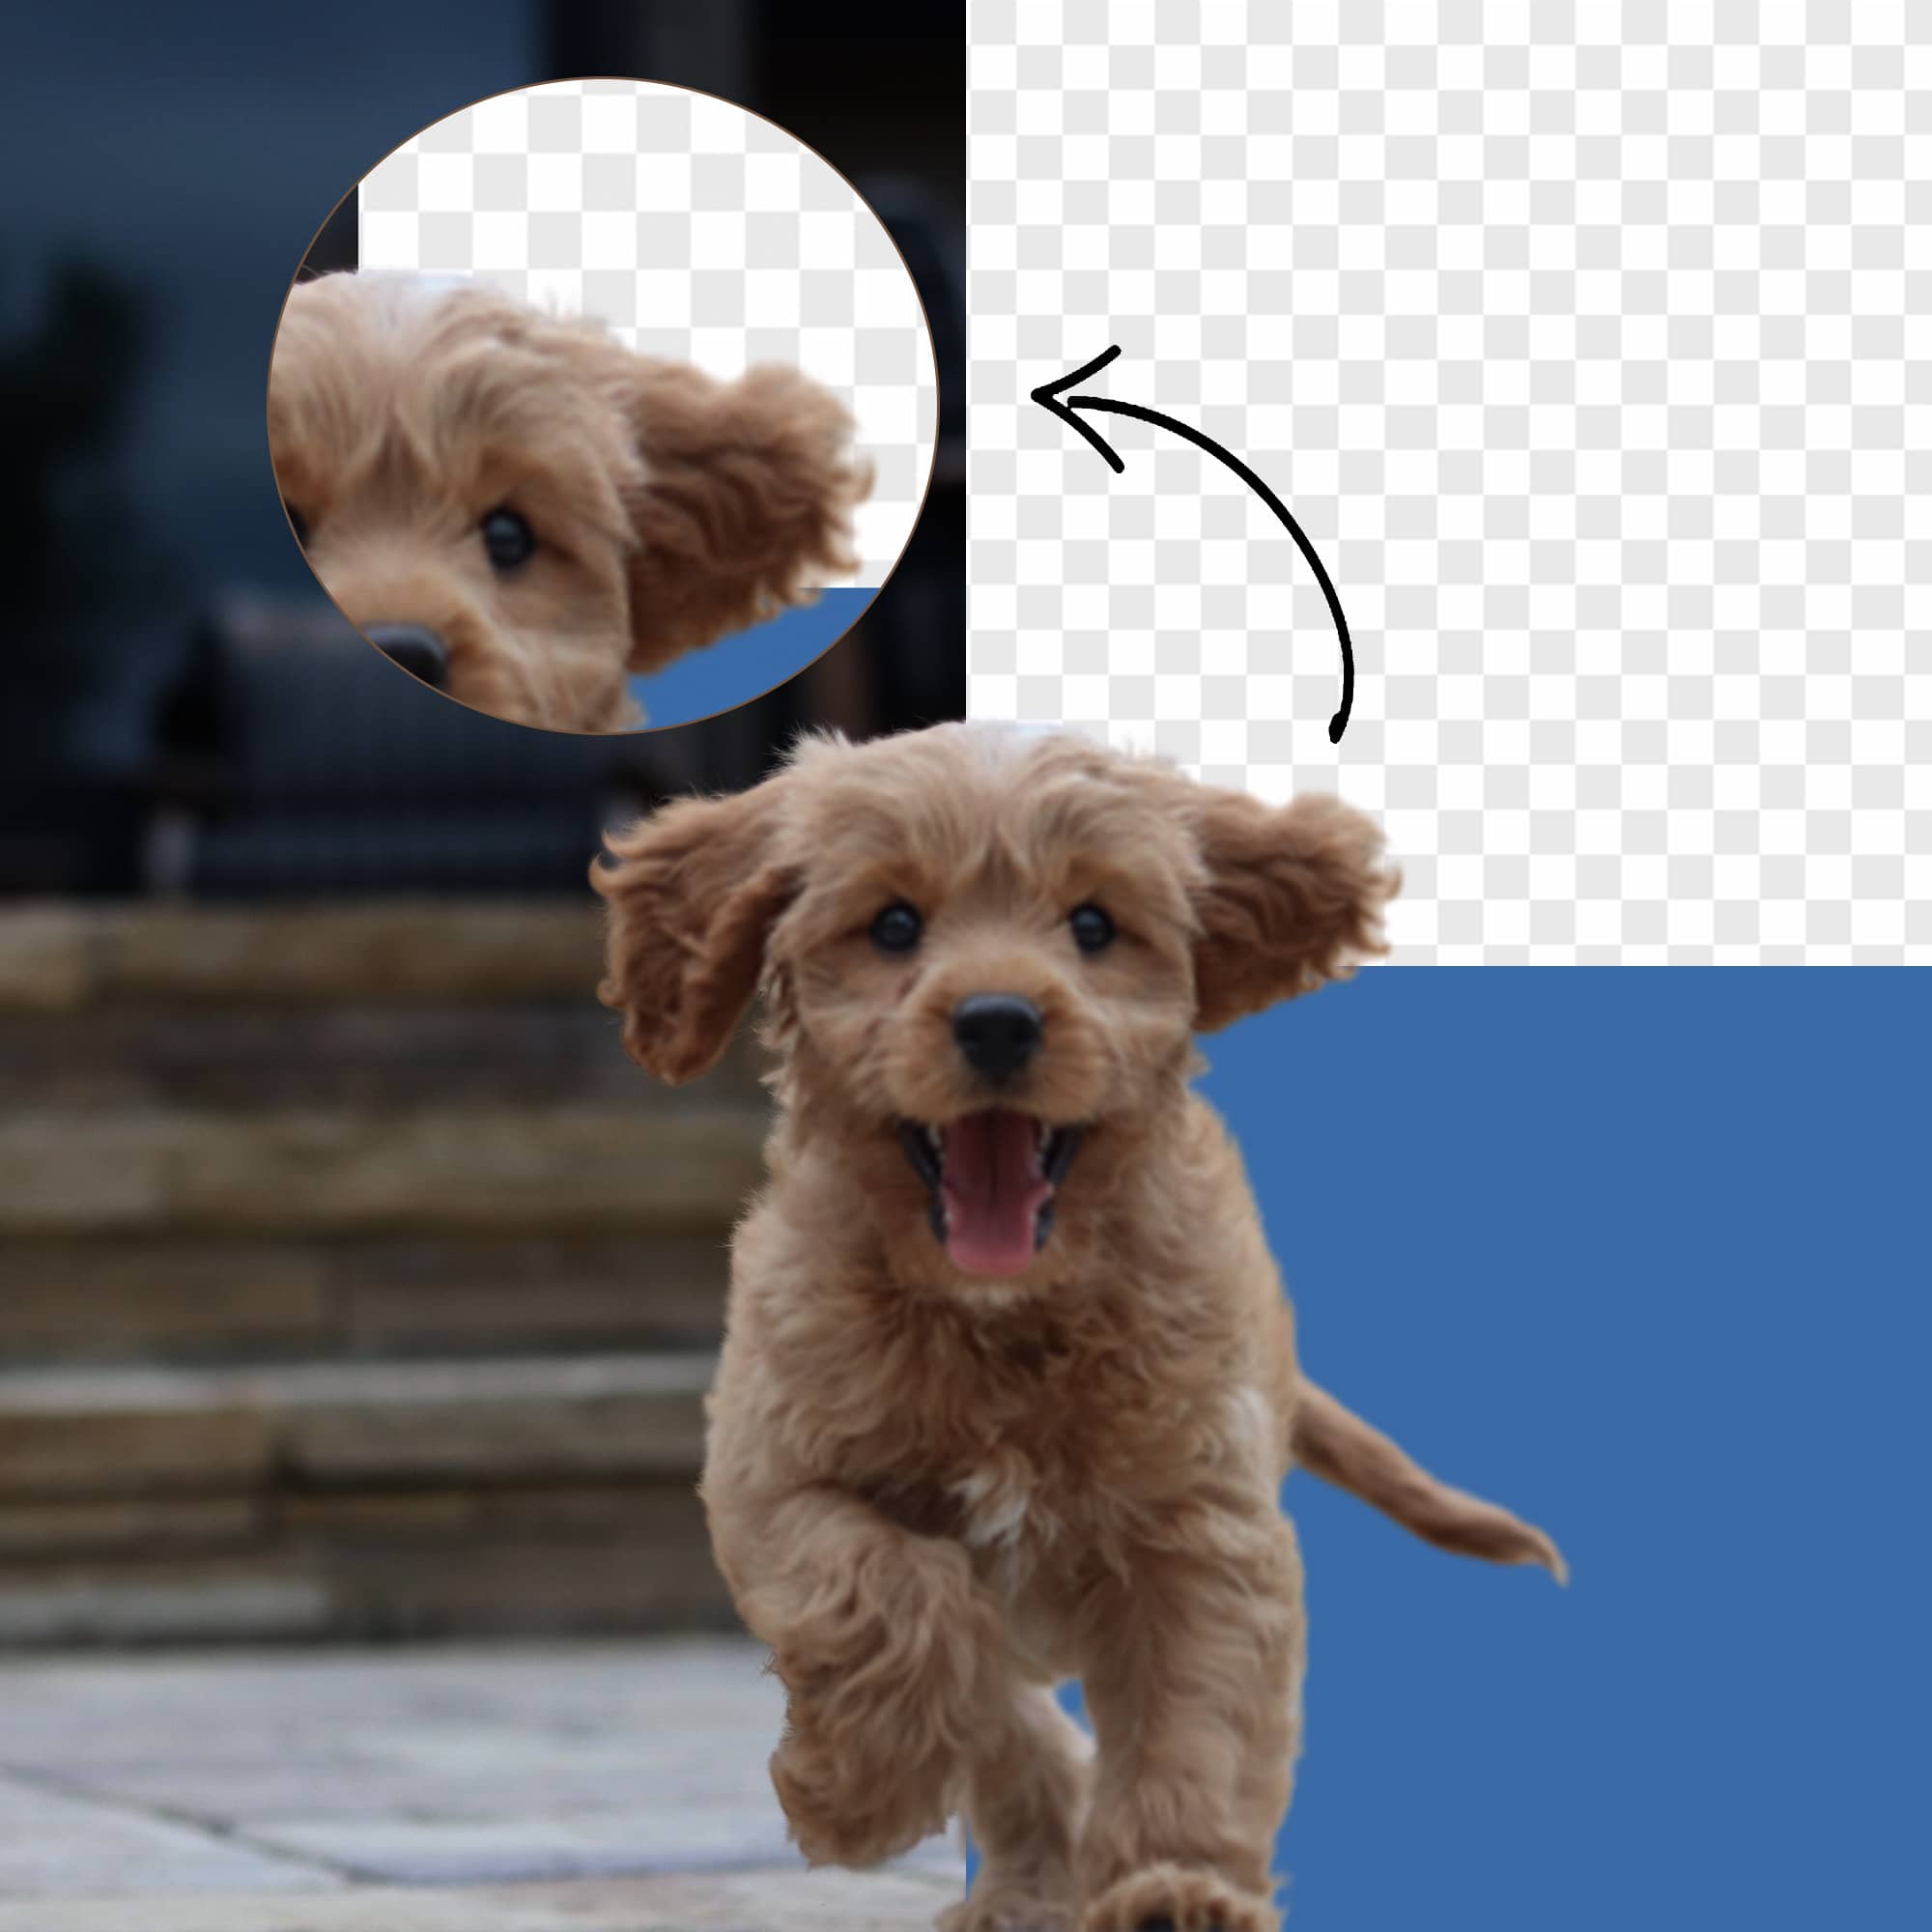 How jpgtopngtransparent.com work to convert jpg images to png transparent